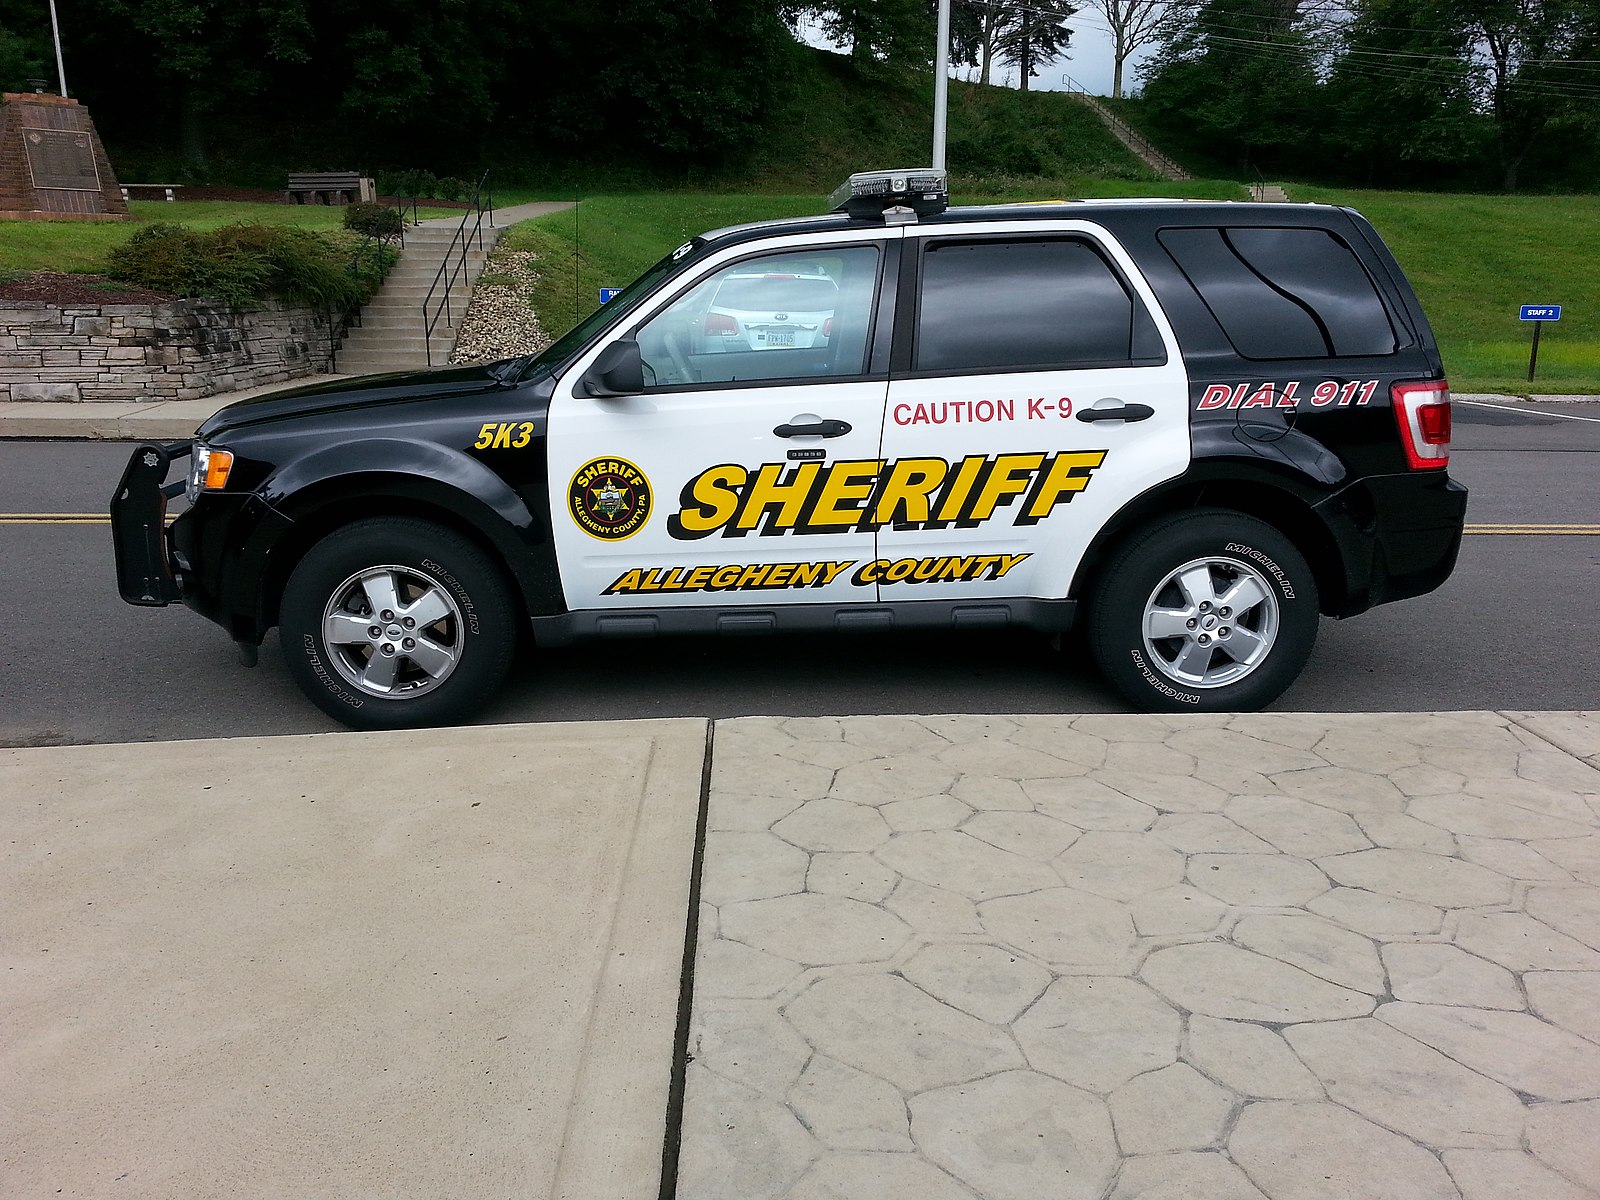 A K-9 vehicle for the Allegheny County Sheriff's Department